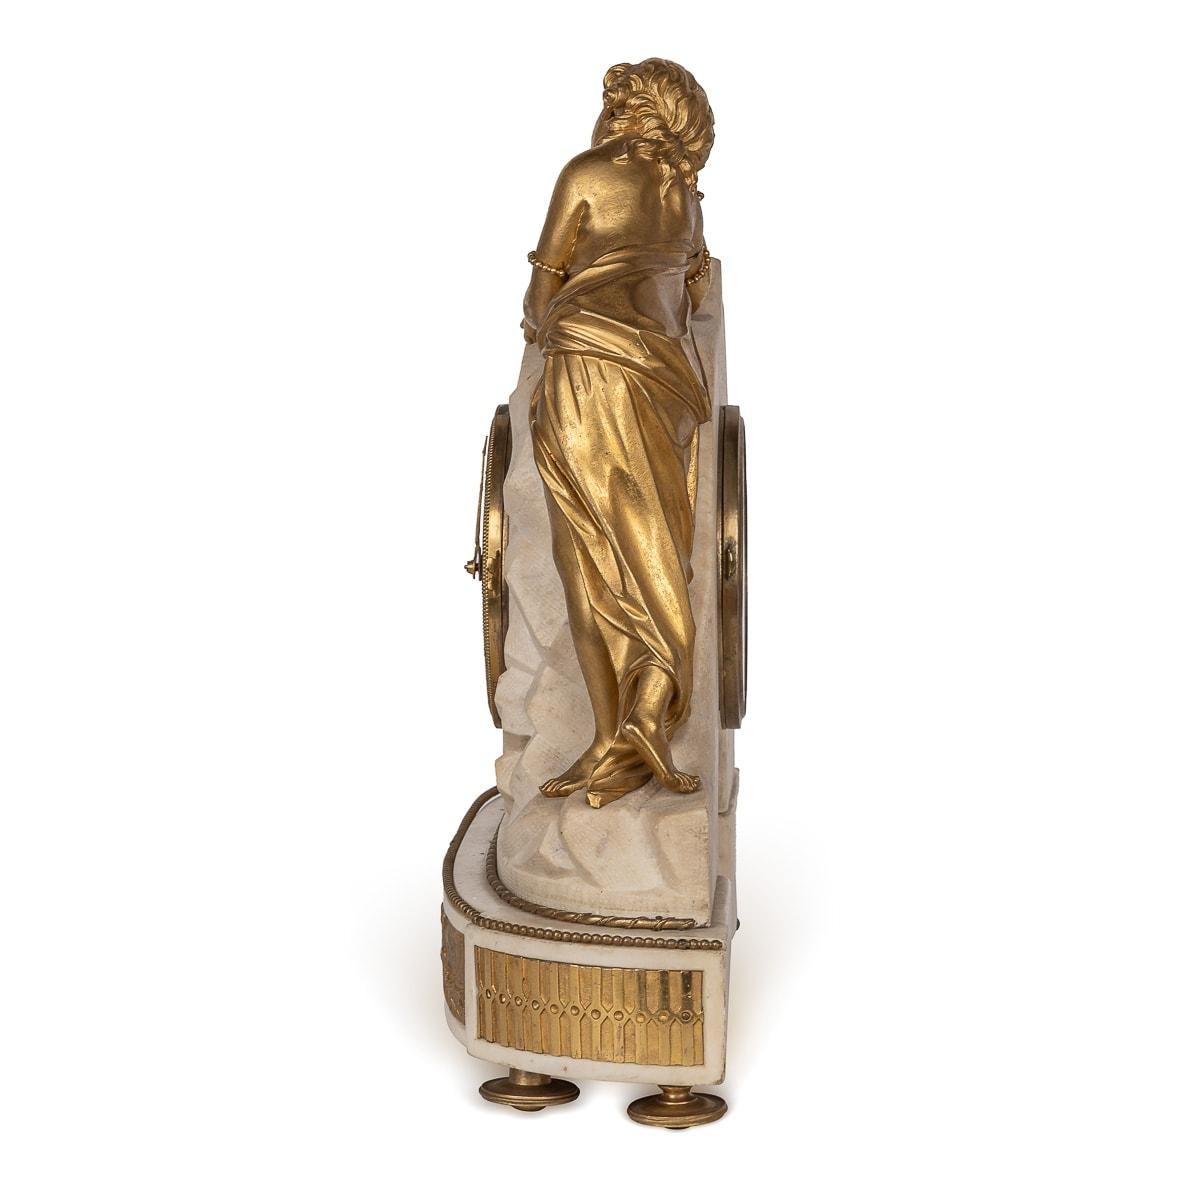 An exquisite 18th Century Louis XVI mantel clock crafted in ormolu and marble, adorned with intricate detailing. Housed within a meticulously carved marble case, the clock features a charming lady figure and cherub embellishments on each side,